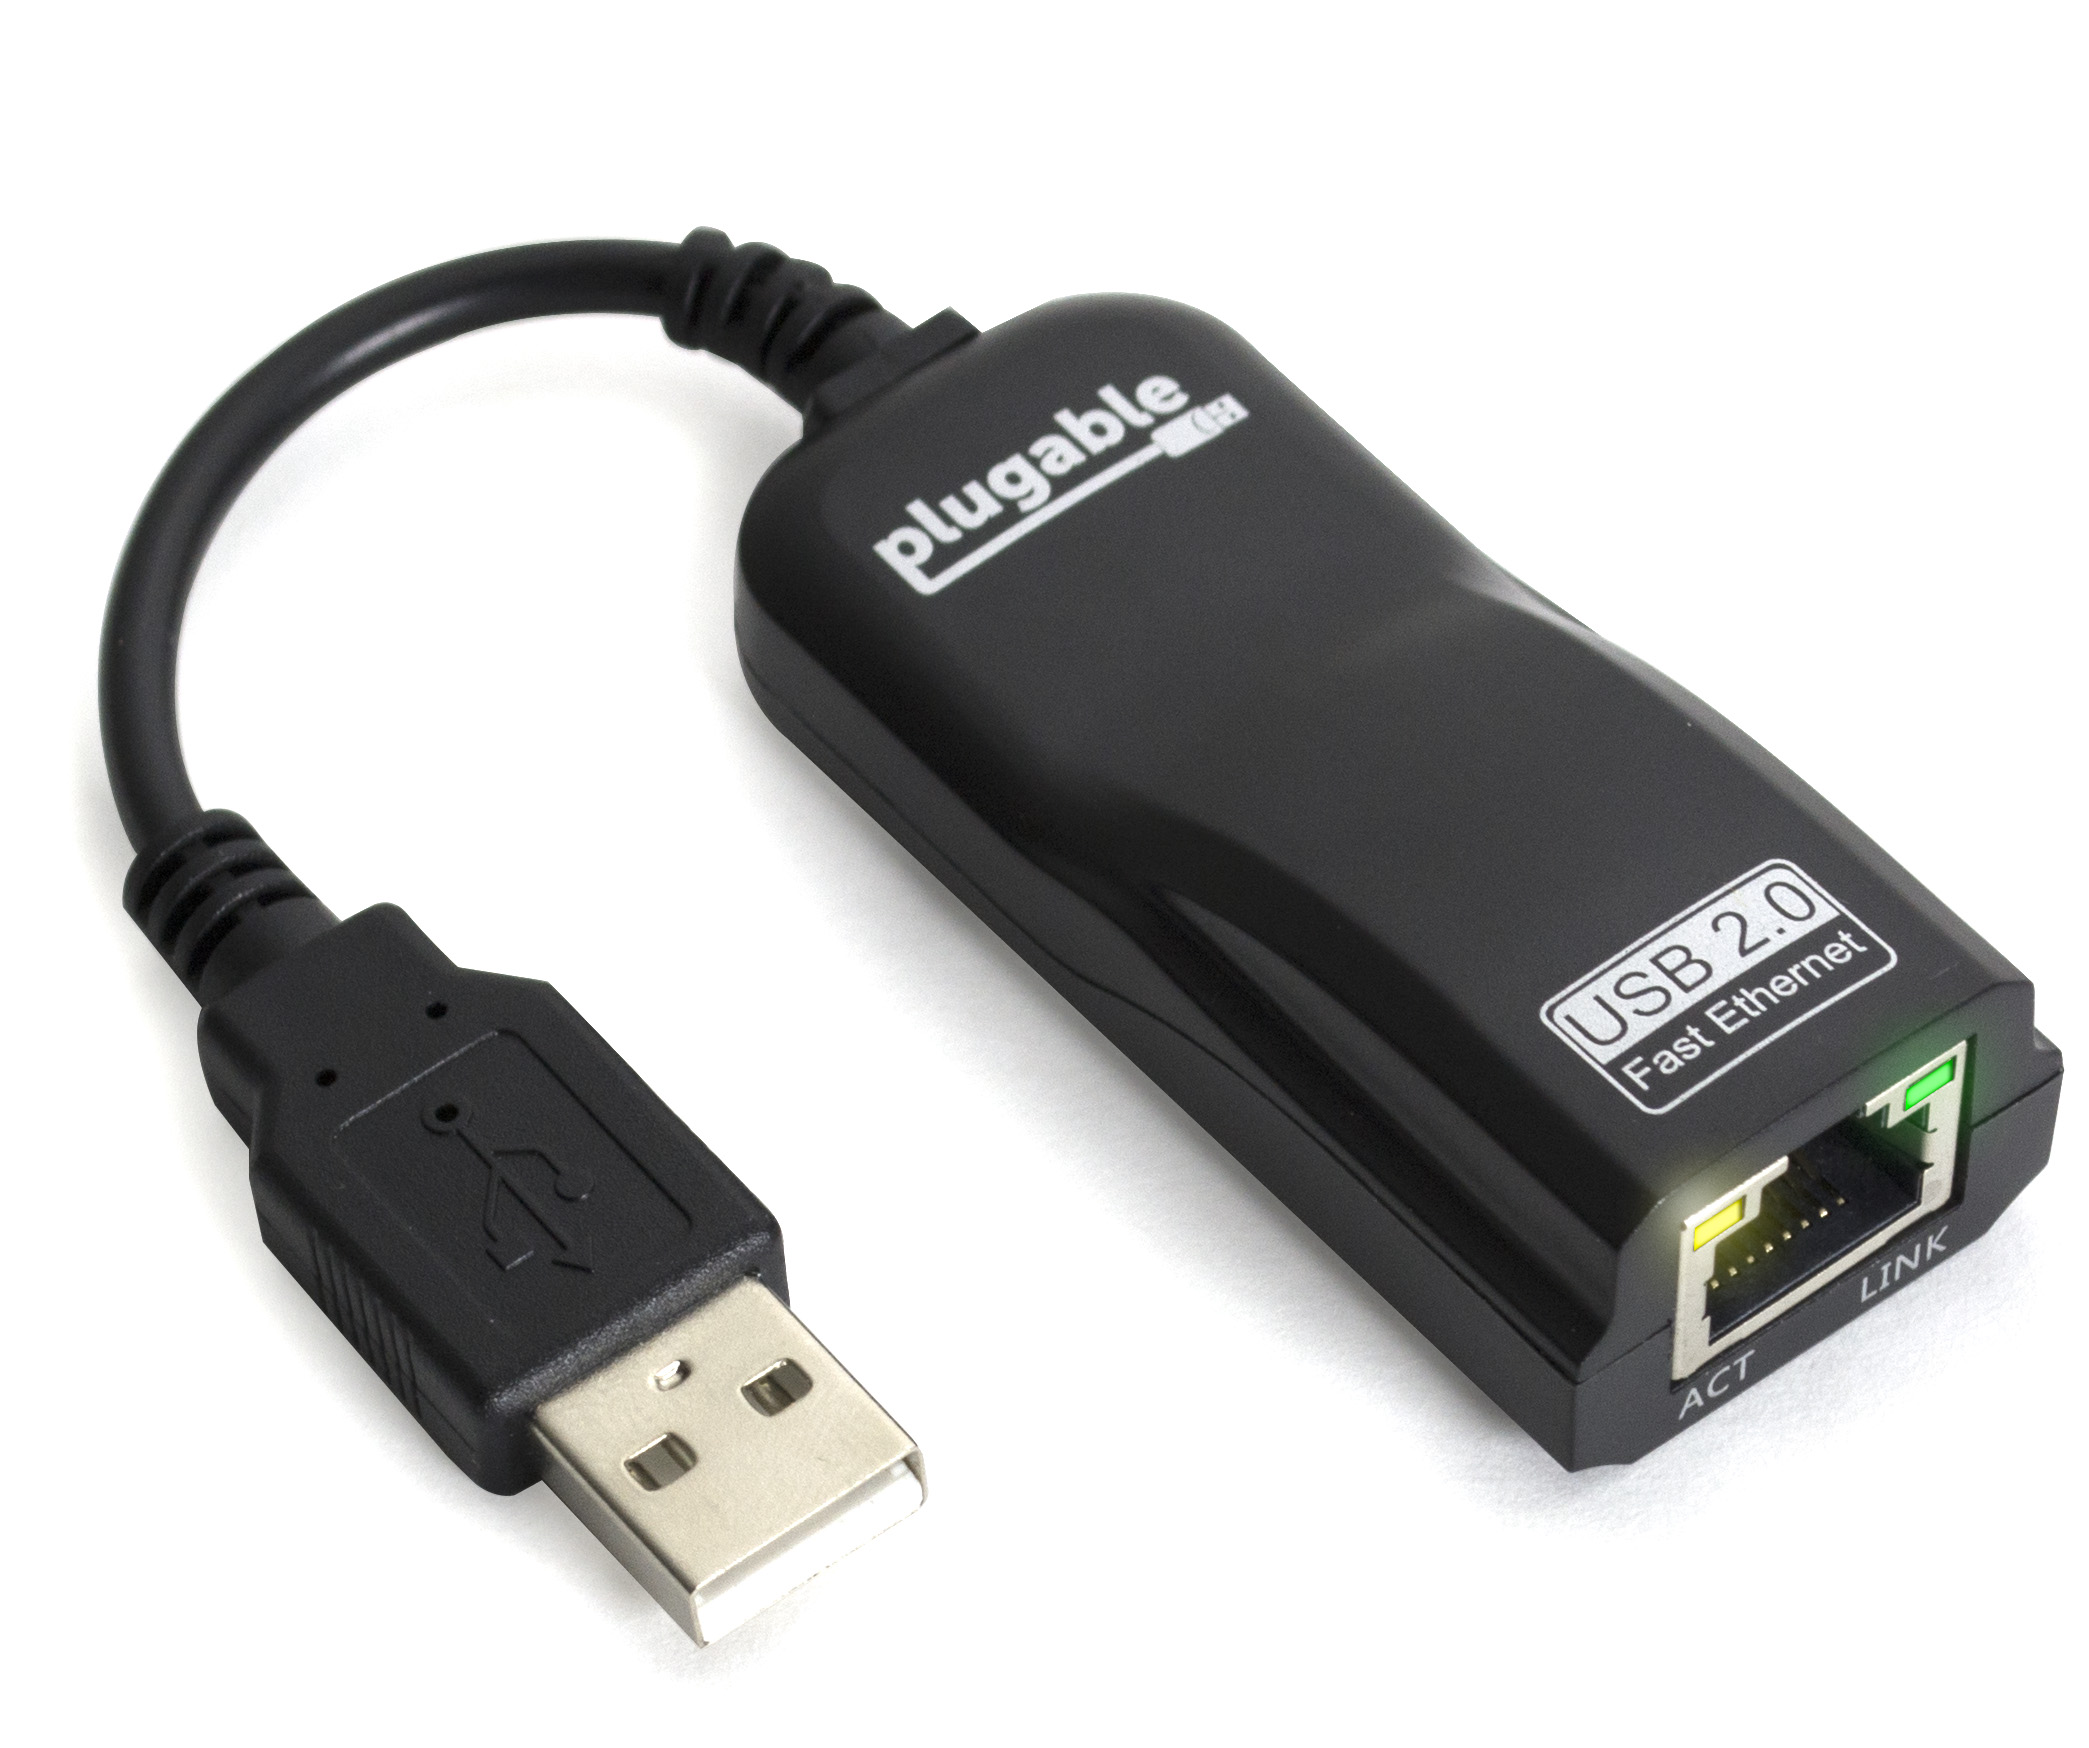 Plugable USB 2.0 to Ethernet Fast 10/100 LAN Wired Network Adapter Compatible with Chromebook, Windows, Linux - image 1 of 6